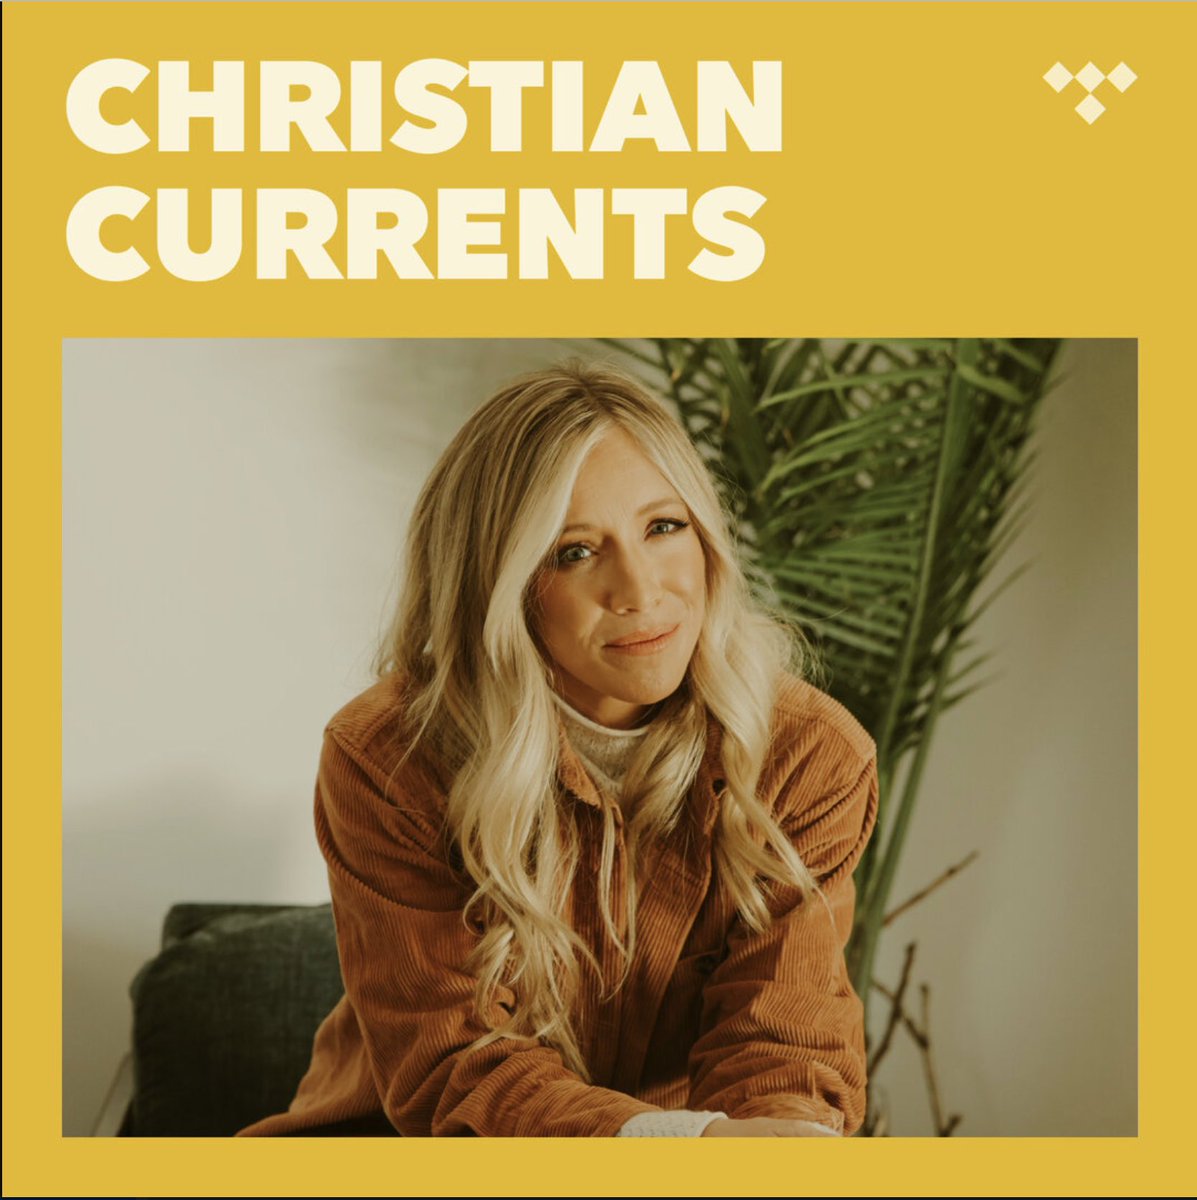 Thank you @TIDAL for adding “All Of My Days” to Christian Currents and for putting me on the cover!!! 🤎 tidal.com/browse/playlis…